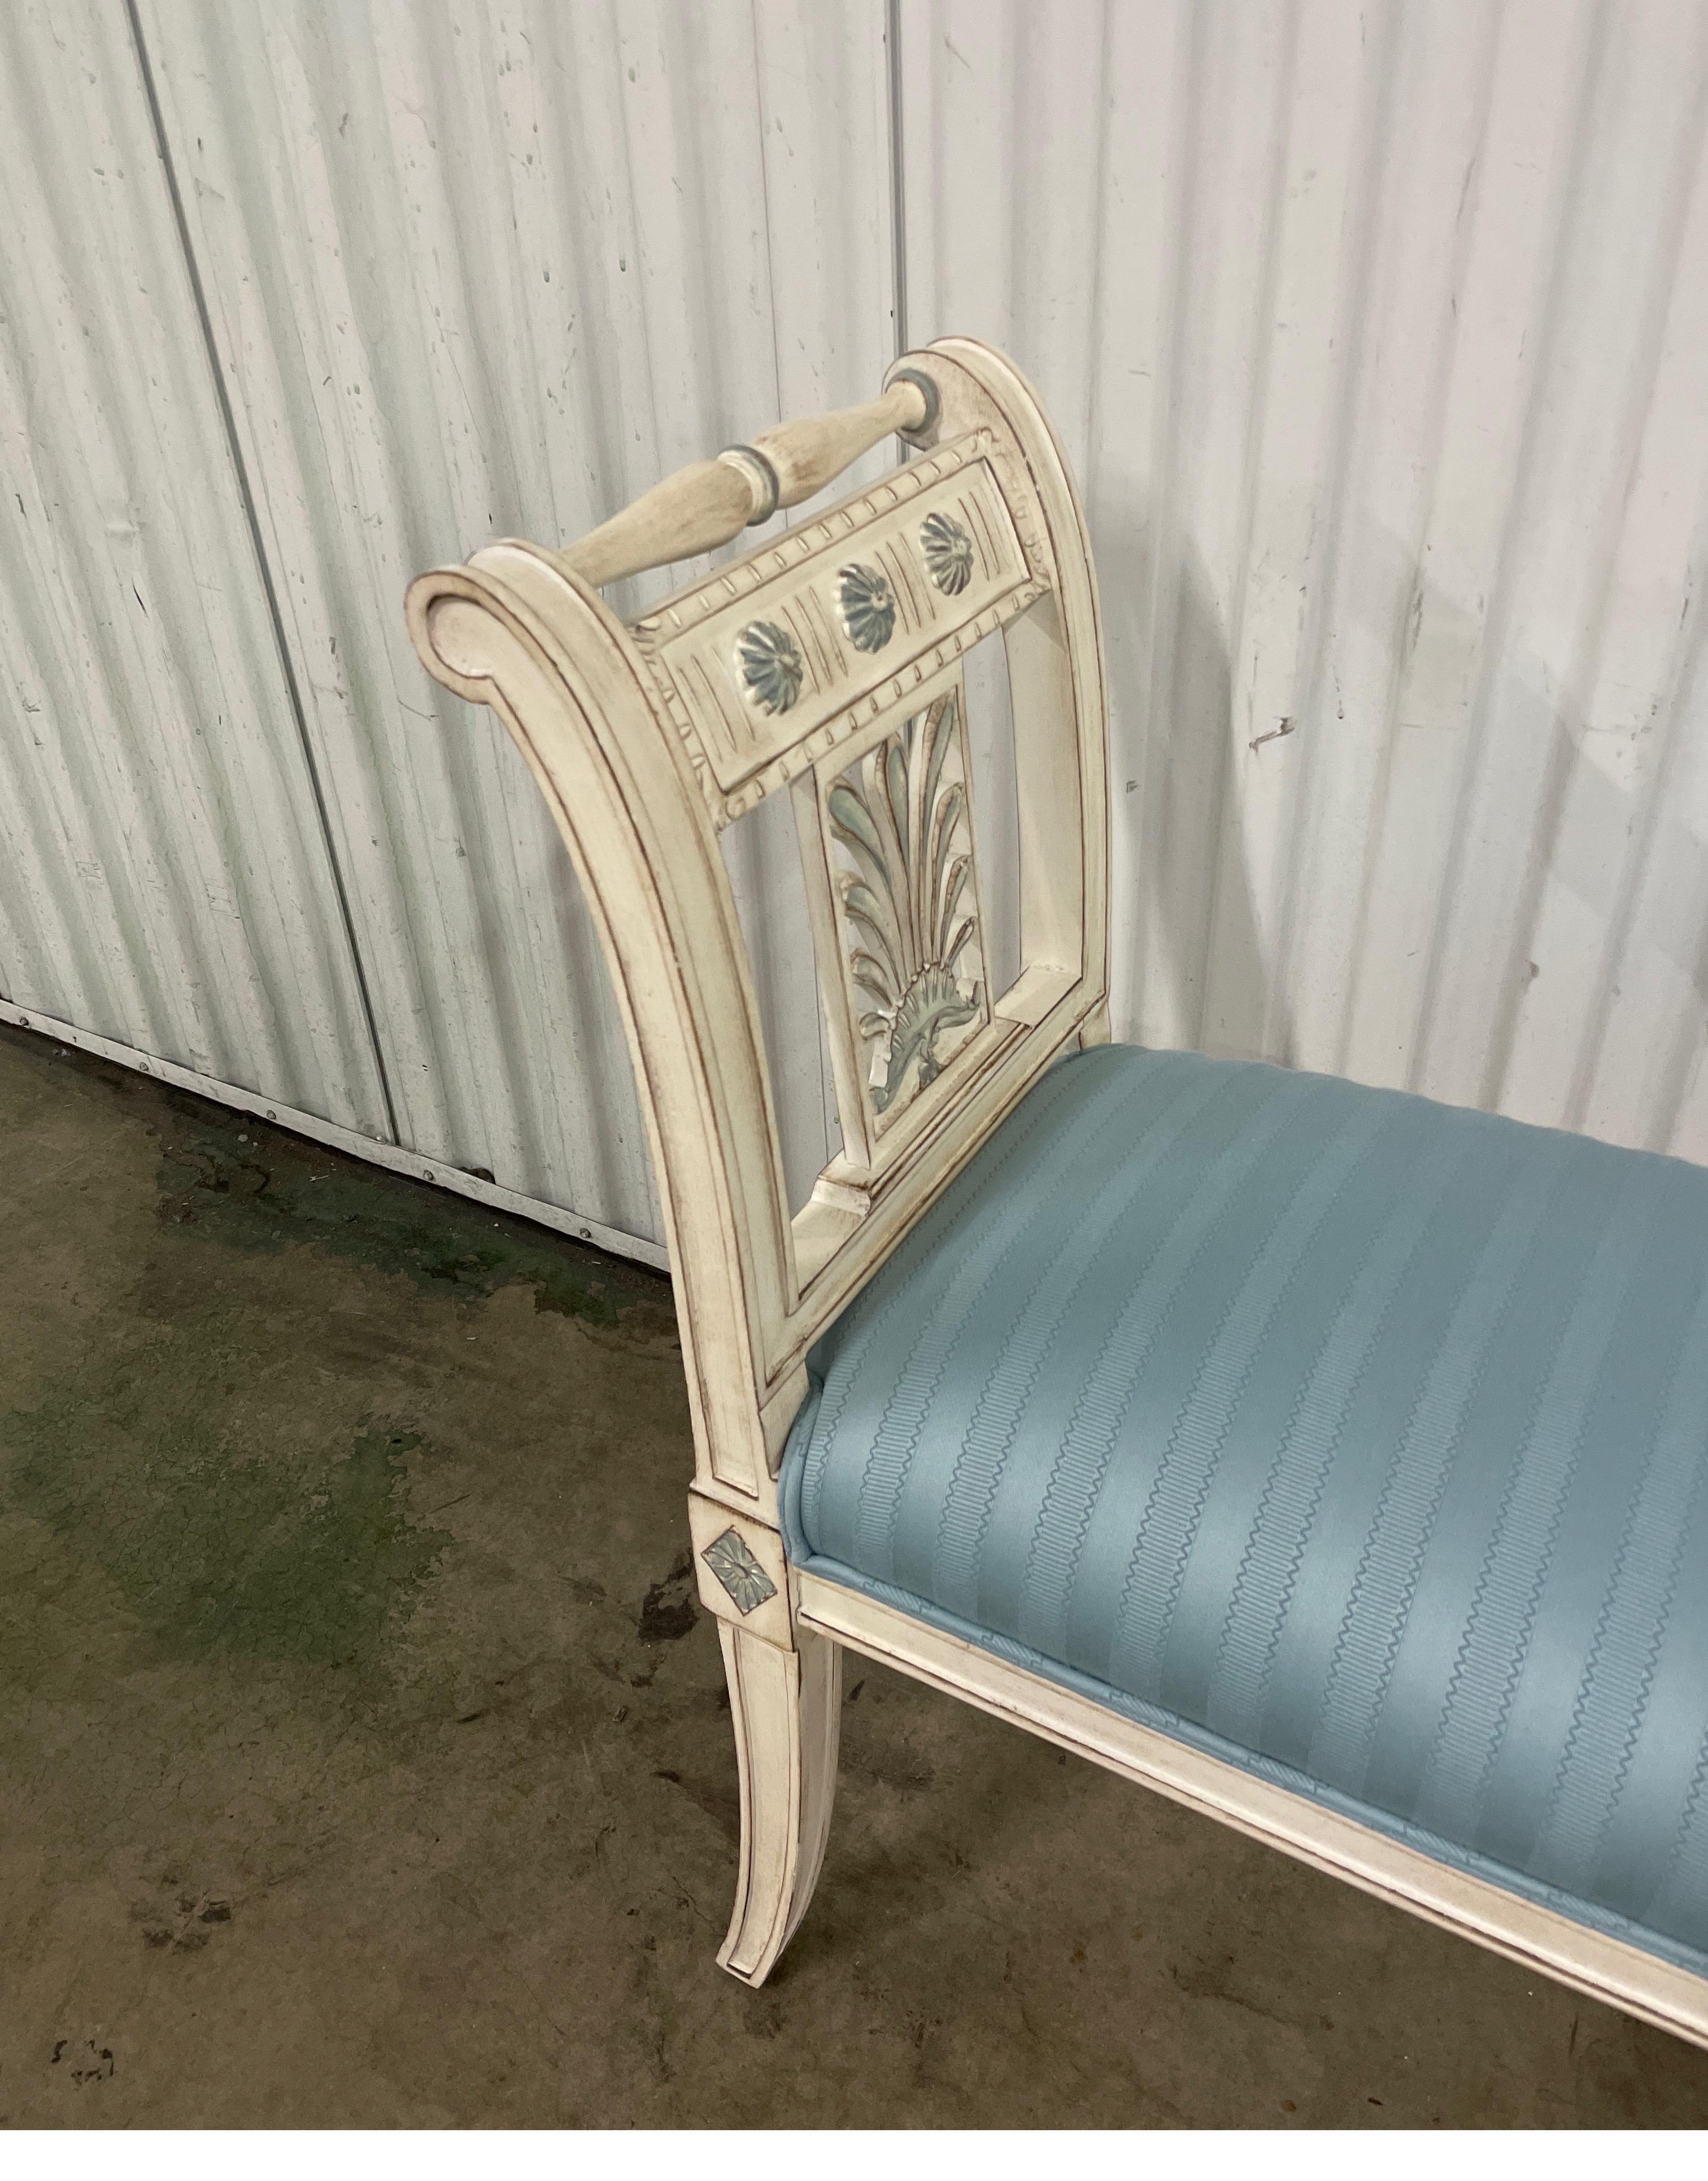 Lovely painted Directoire style French window bench. Nicely carved and painted bench with light blue upholstered seat. Very versatile.